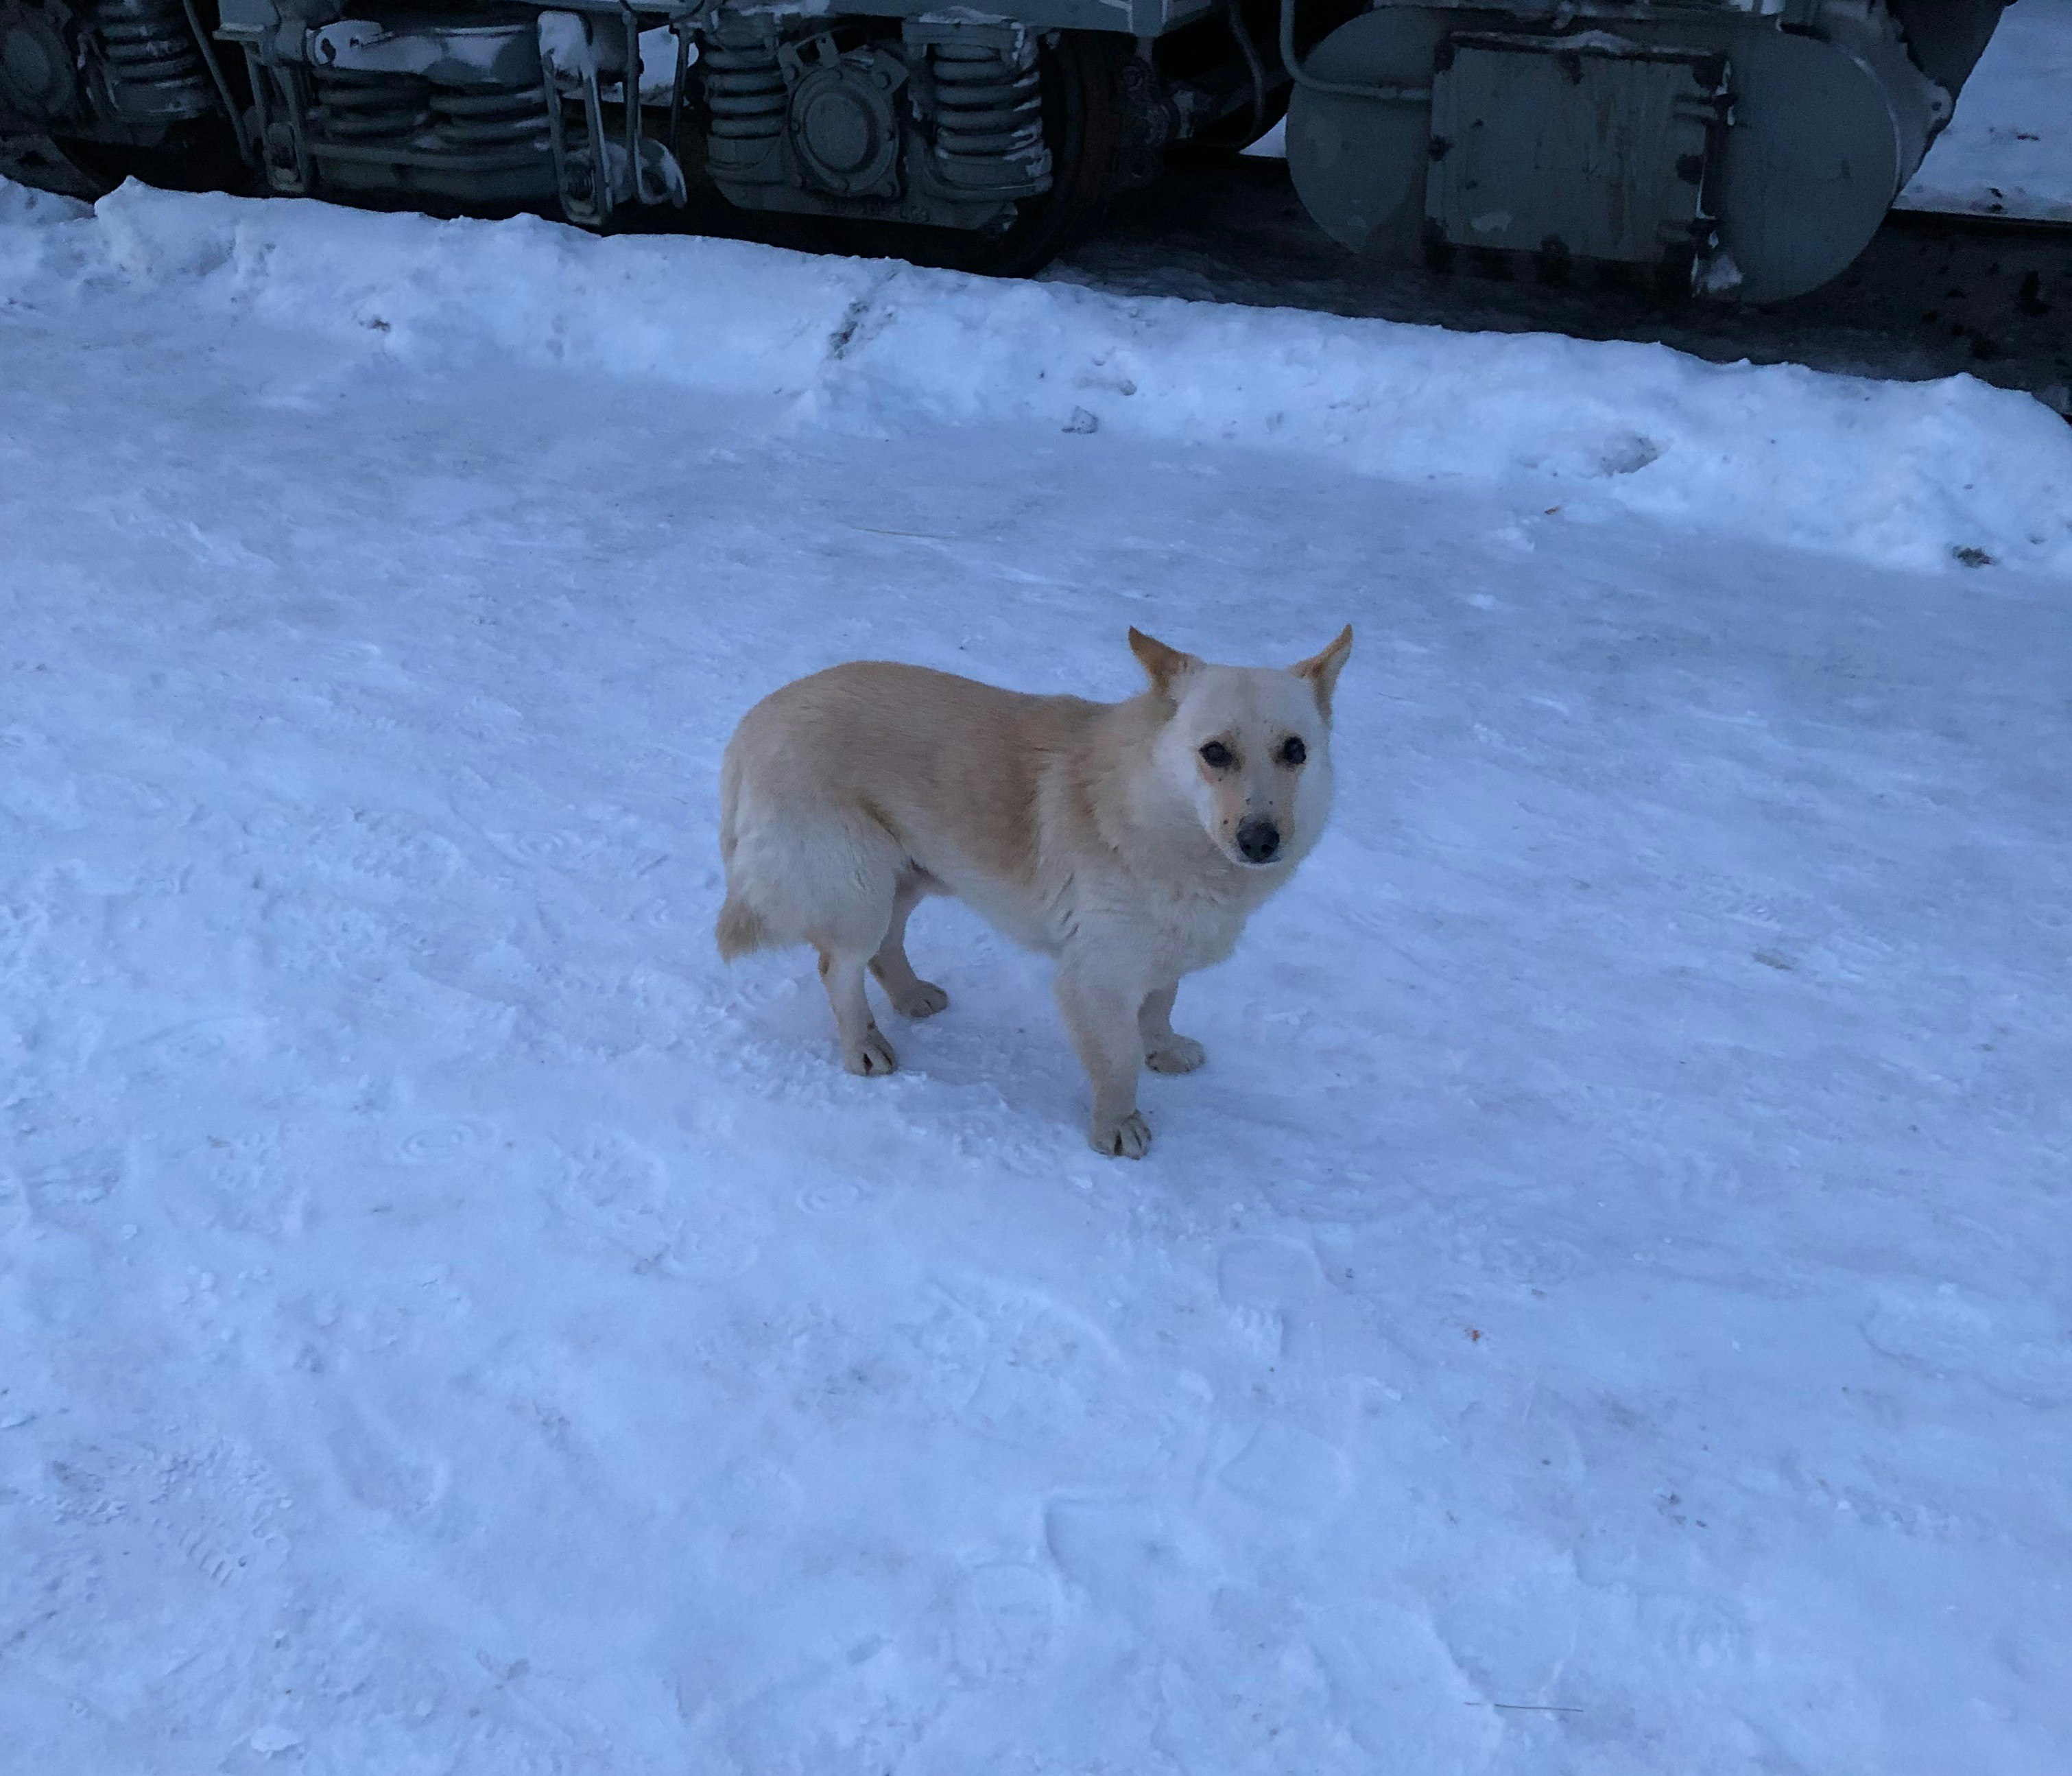 A white-gold coloured dog looks nervously up at the camera, as she stands on a snowy train platform.